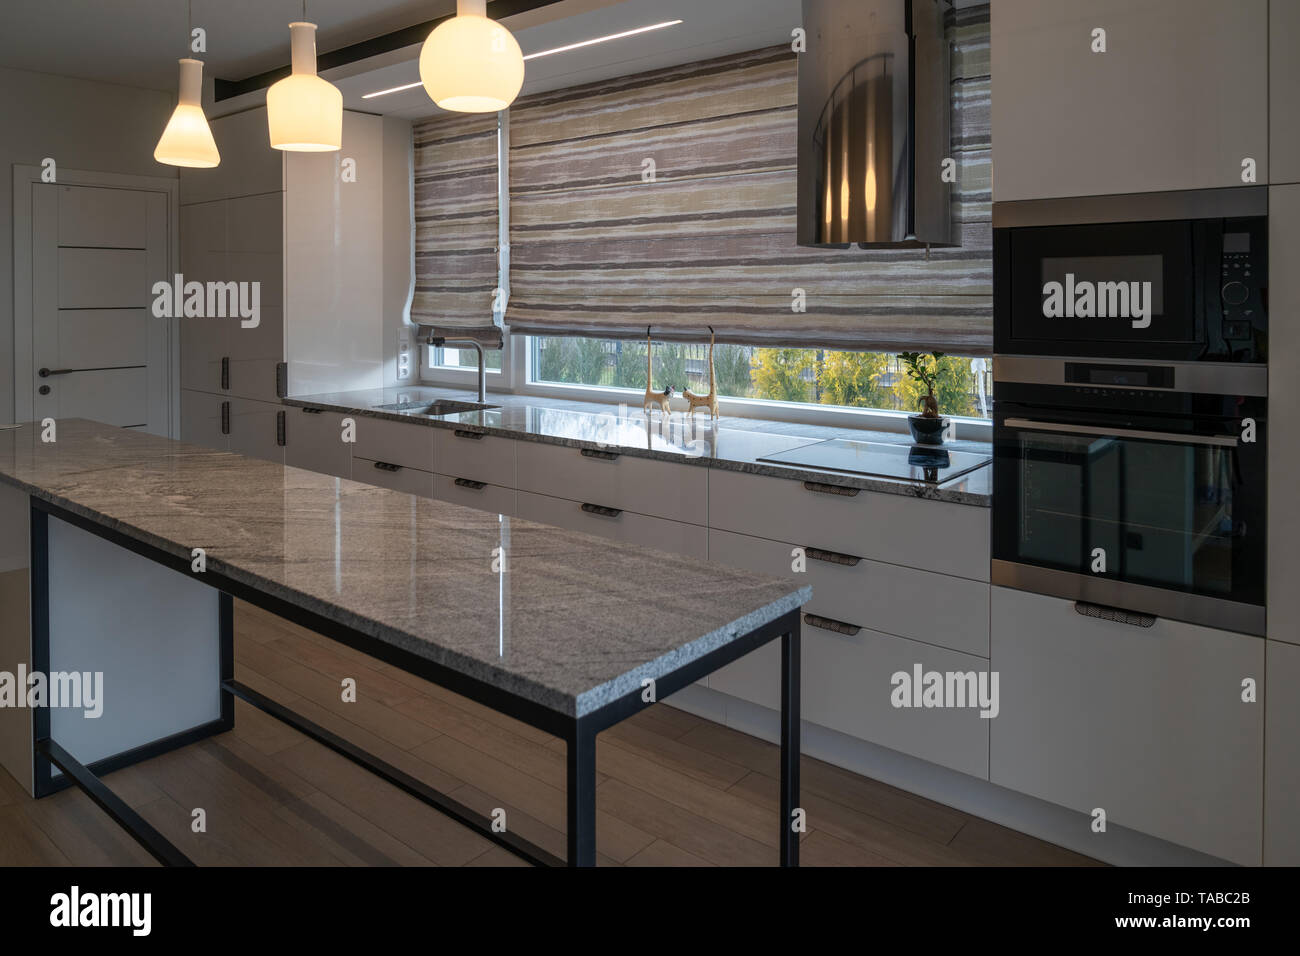 Modern kitchen furniture with marble worktops , drawers, cabinets, faucet by a kitchen sink, hob, steam collector, oven, electrical sockets. Stock Photo